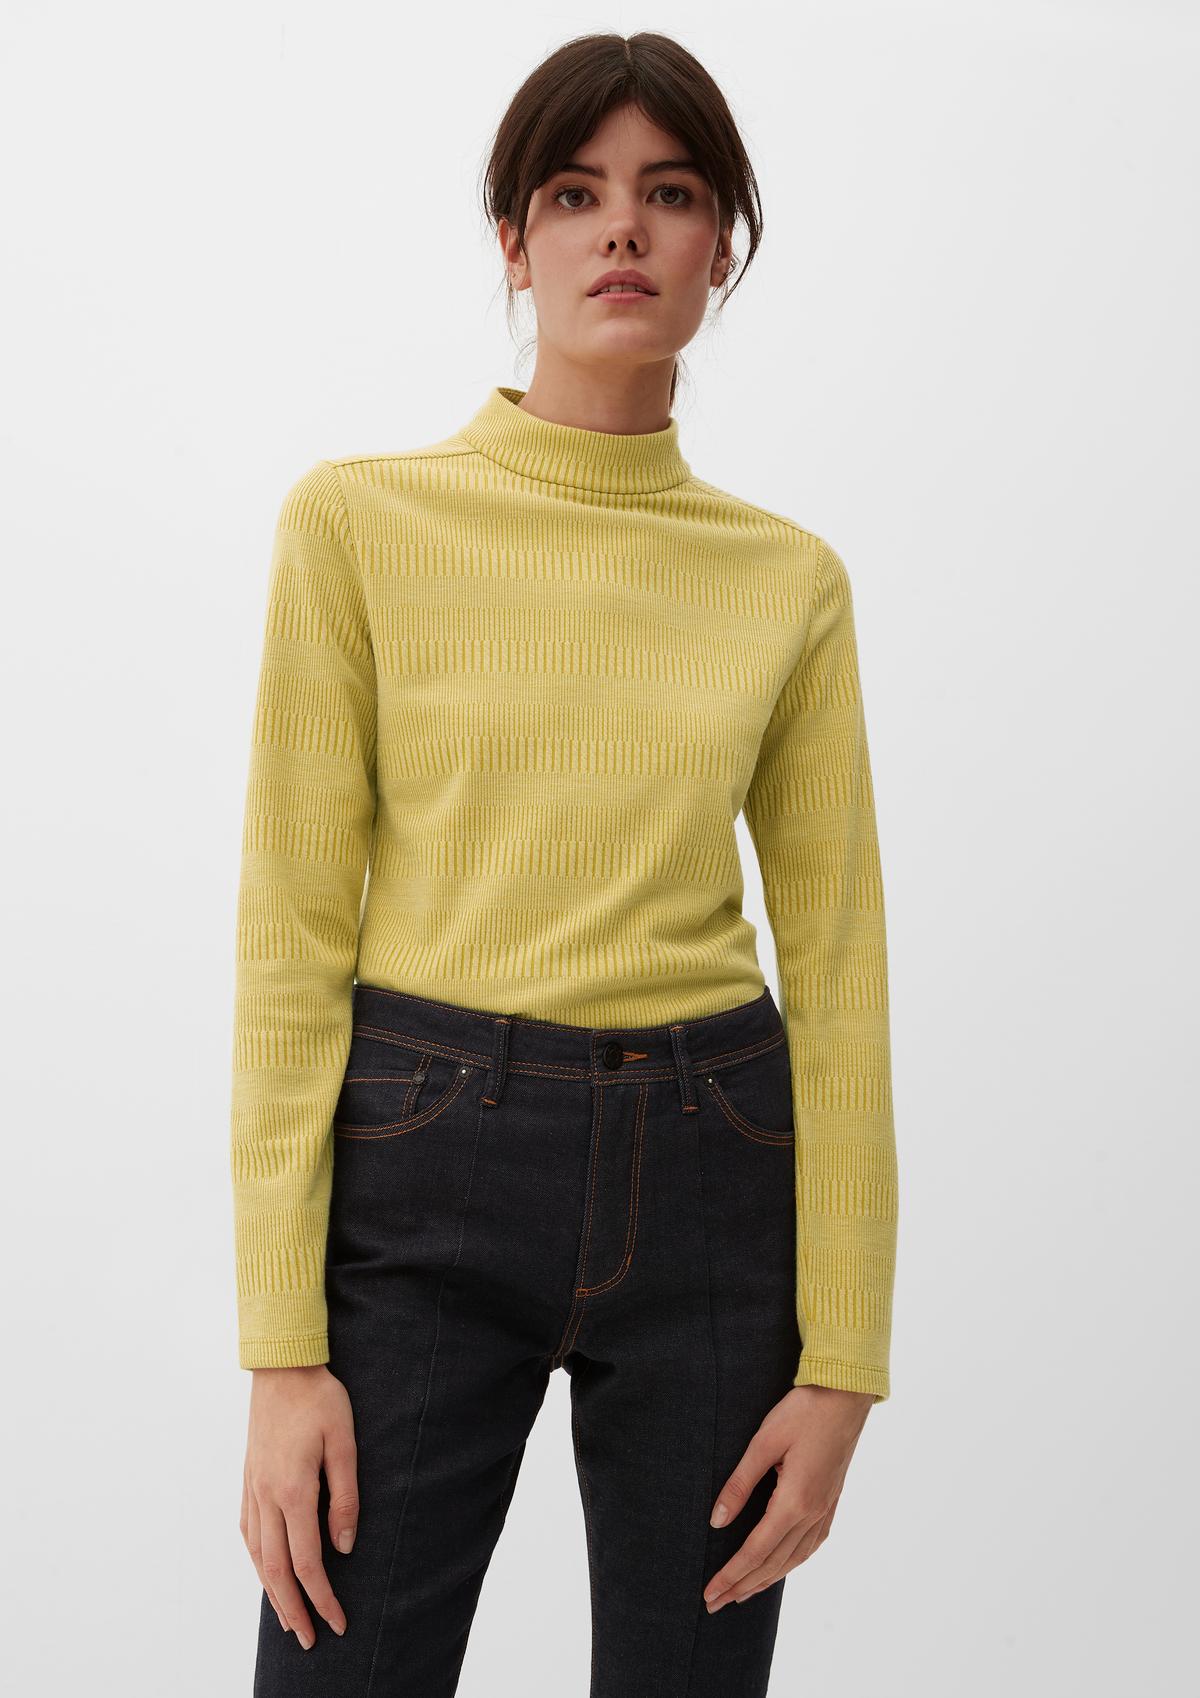 Long sleeve top with a stand-up collar